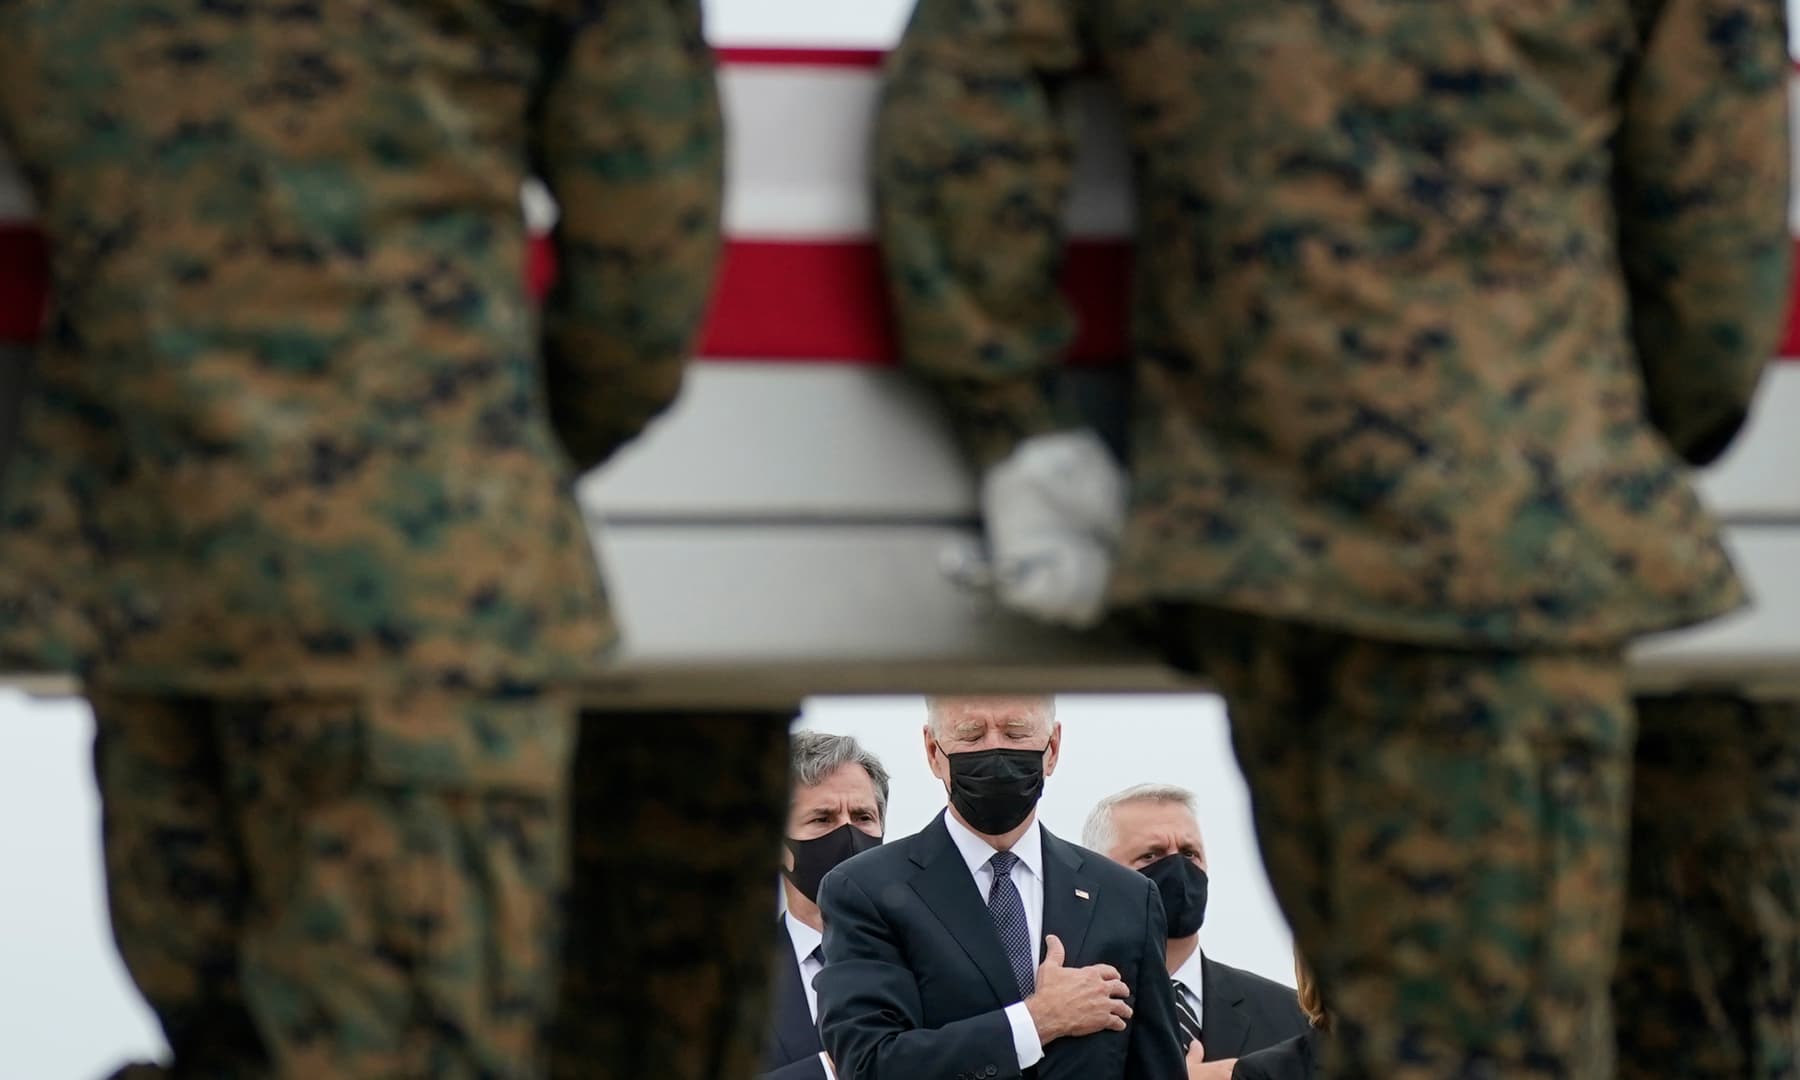 President Joe Biden watches as a carry team moves a transfer case containing the remains of Marine Corps Lance Cpl Kareem M Nikoui, 20, of Norco, California, during a casualty return at Dover Air Force Base, Delaware, US on August 29, 2021. — AP